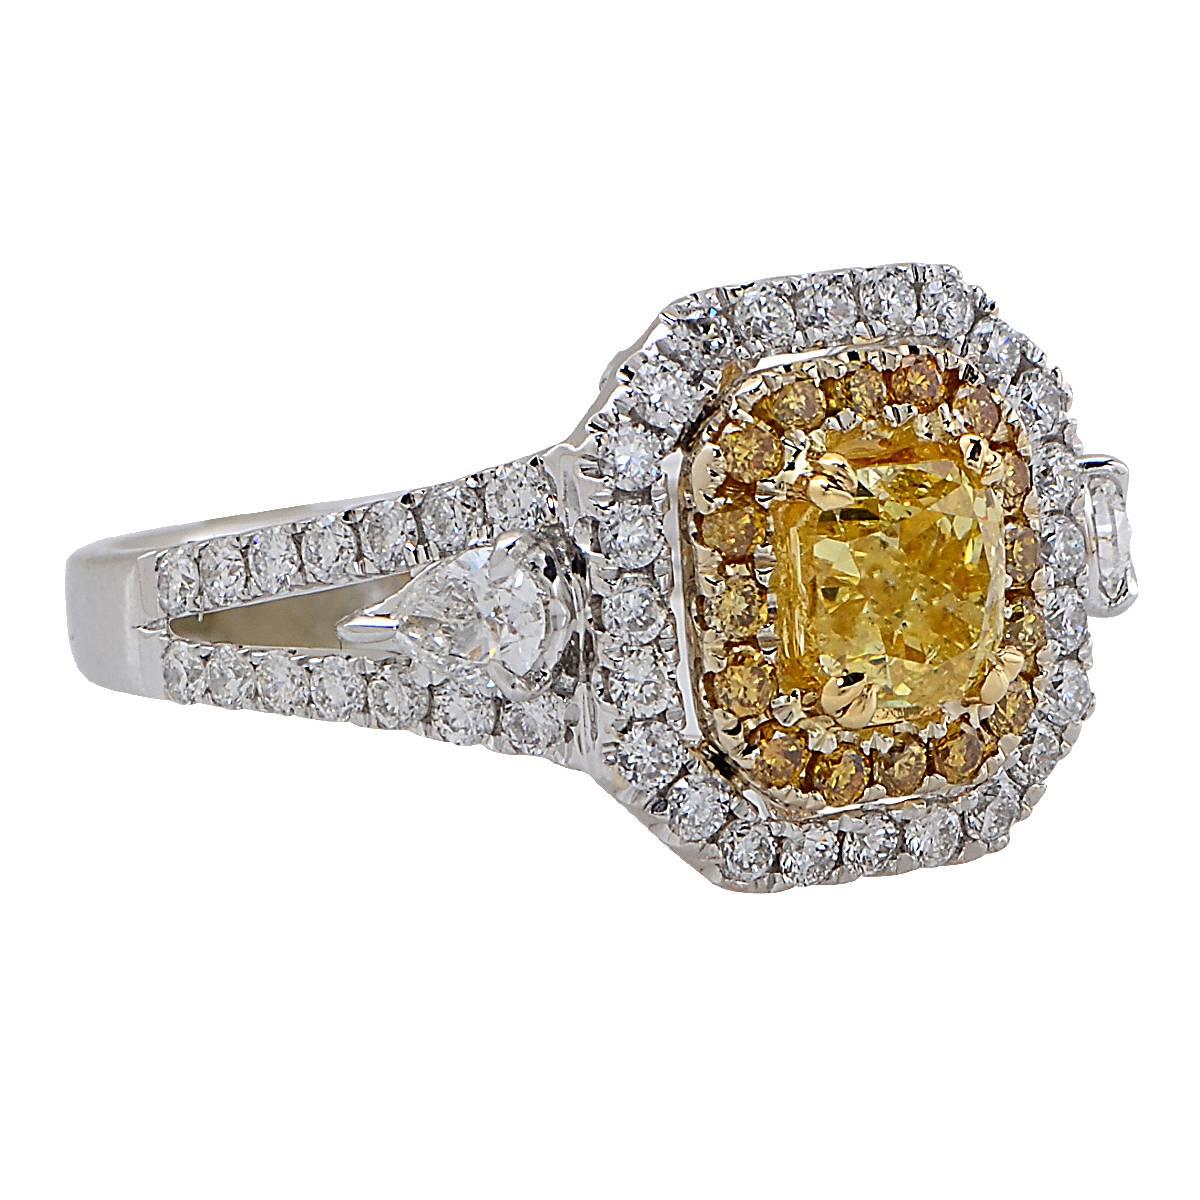 Stunning engagement ring crafted in 18 karat white and yellow gold, showcasing a GIA Certified cushion cut Natural Fancy Vivid Yellow diamond weighing 1.02 carats, accented by 70 mixed cut natural vivid yellow diamonds weighing approximately .91